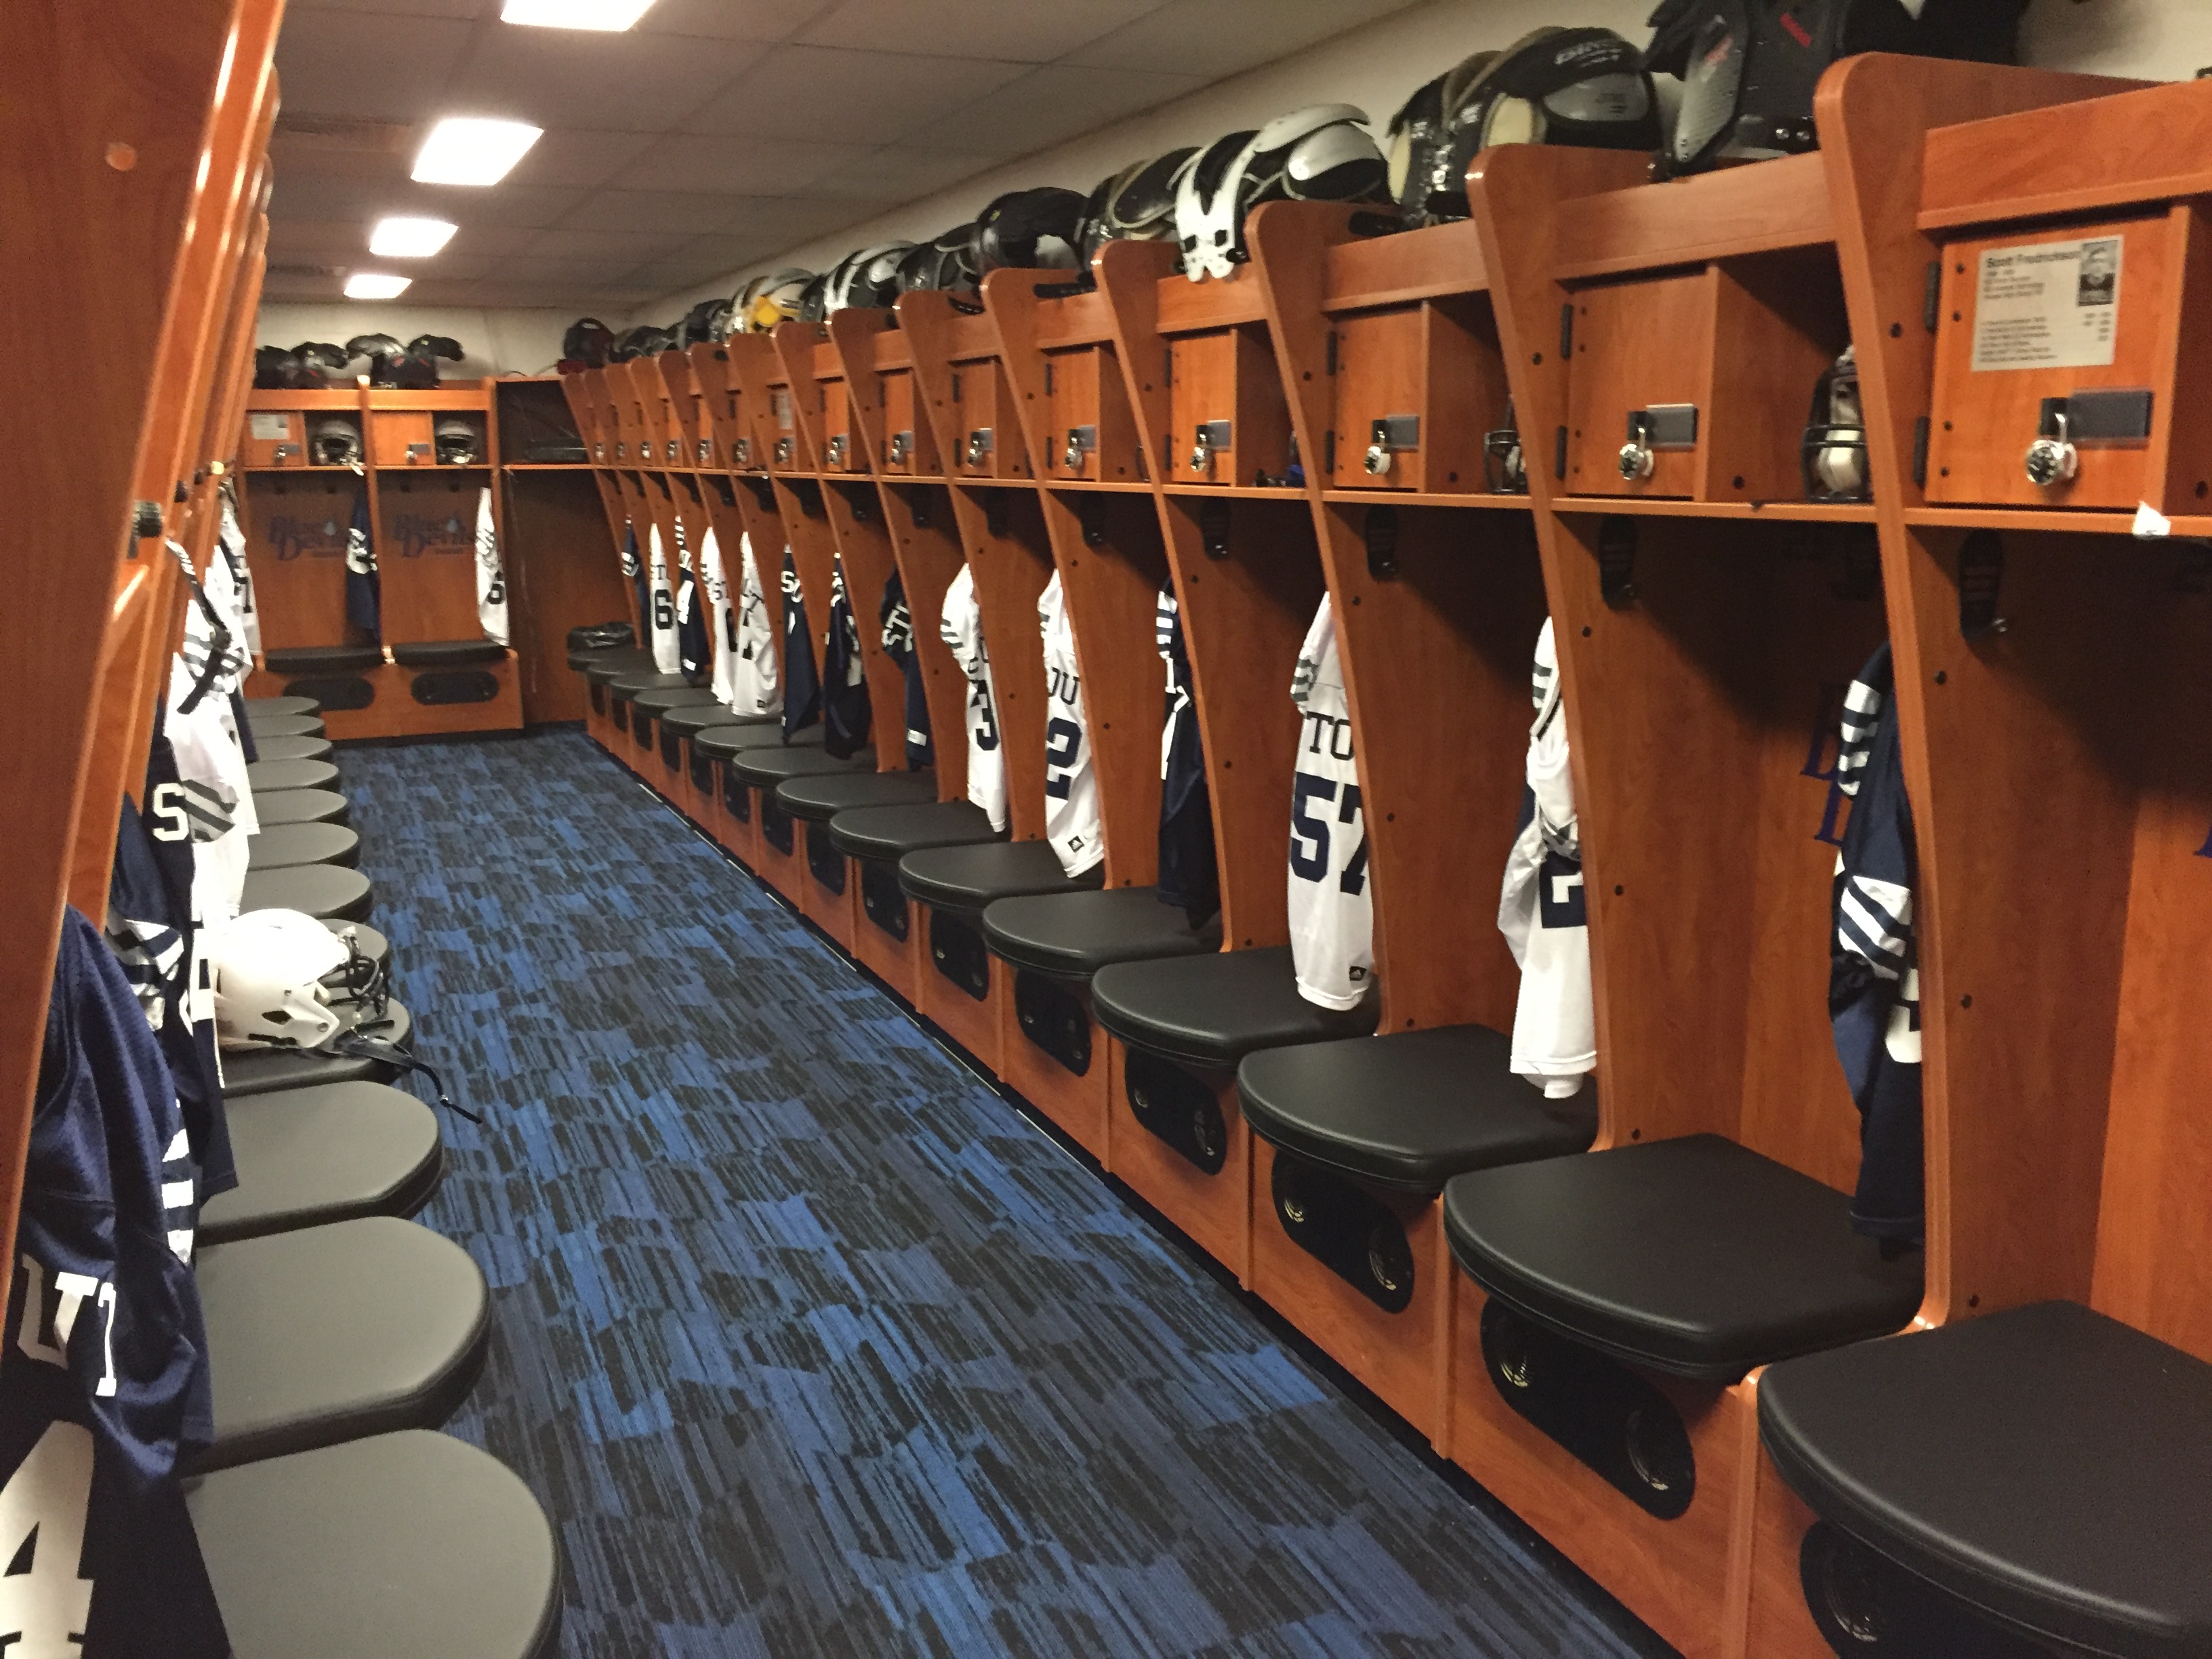 After a successful fundraising effort, the Blue Devil football team was able to renovate their locker room. / UW-Stout Sports Information photos